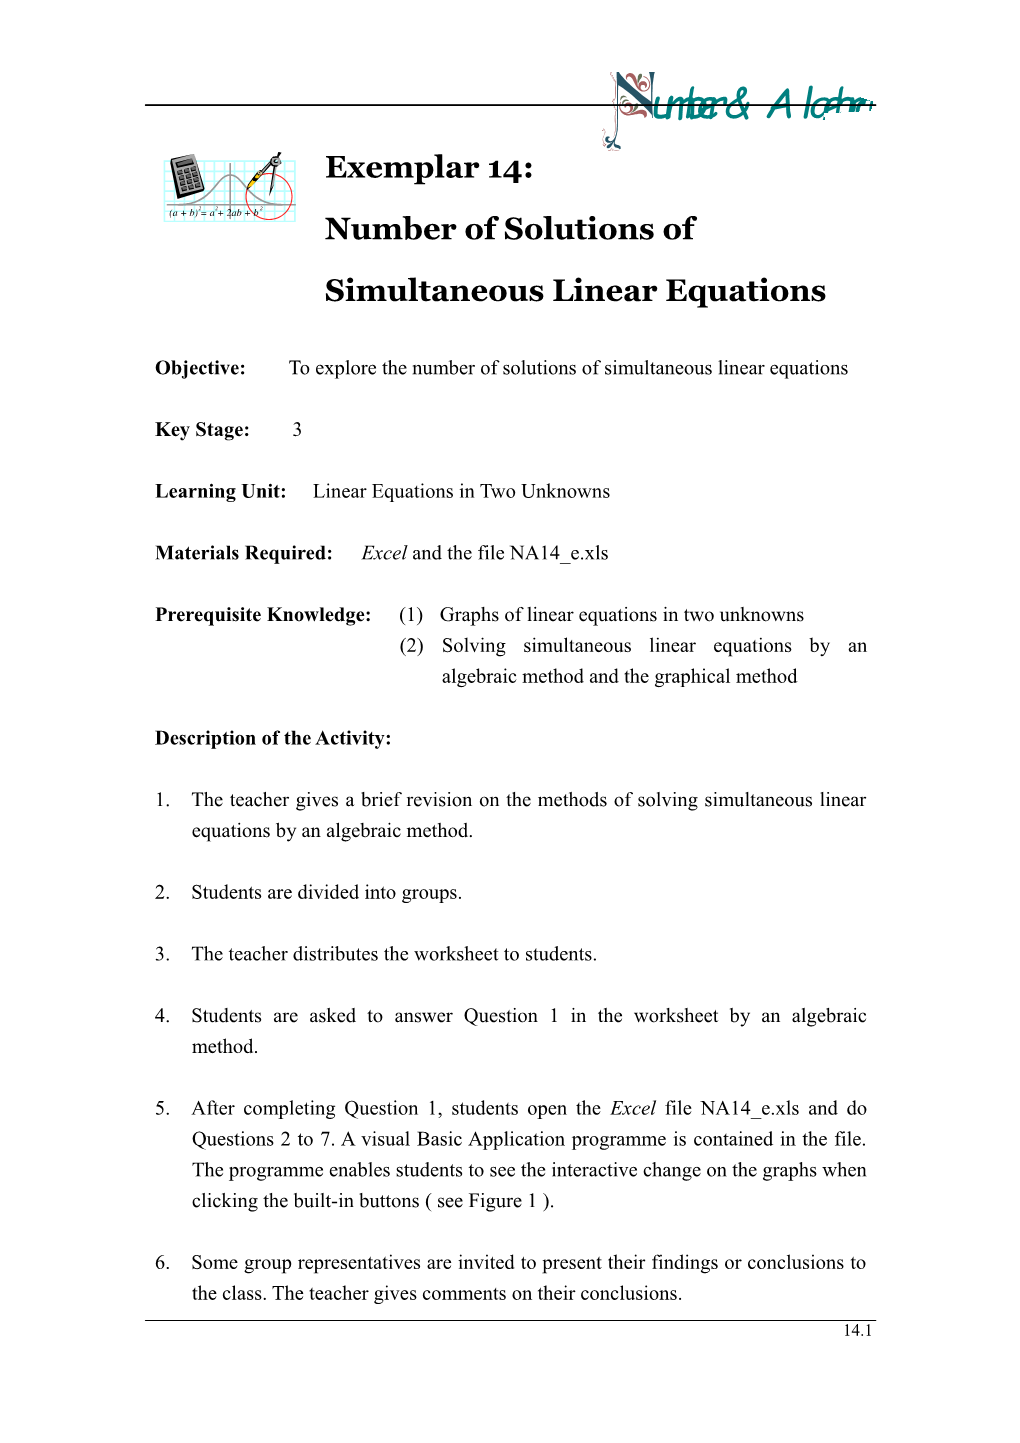 Number of Solutions of Simultaneous Linear Equations